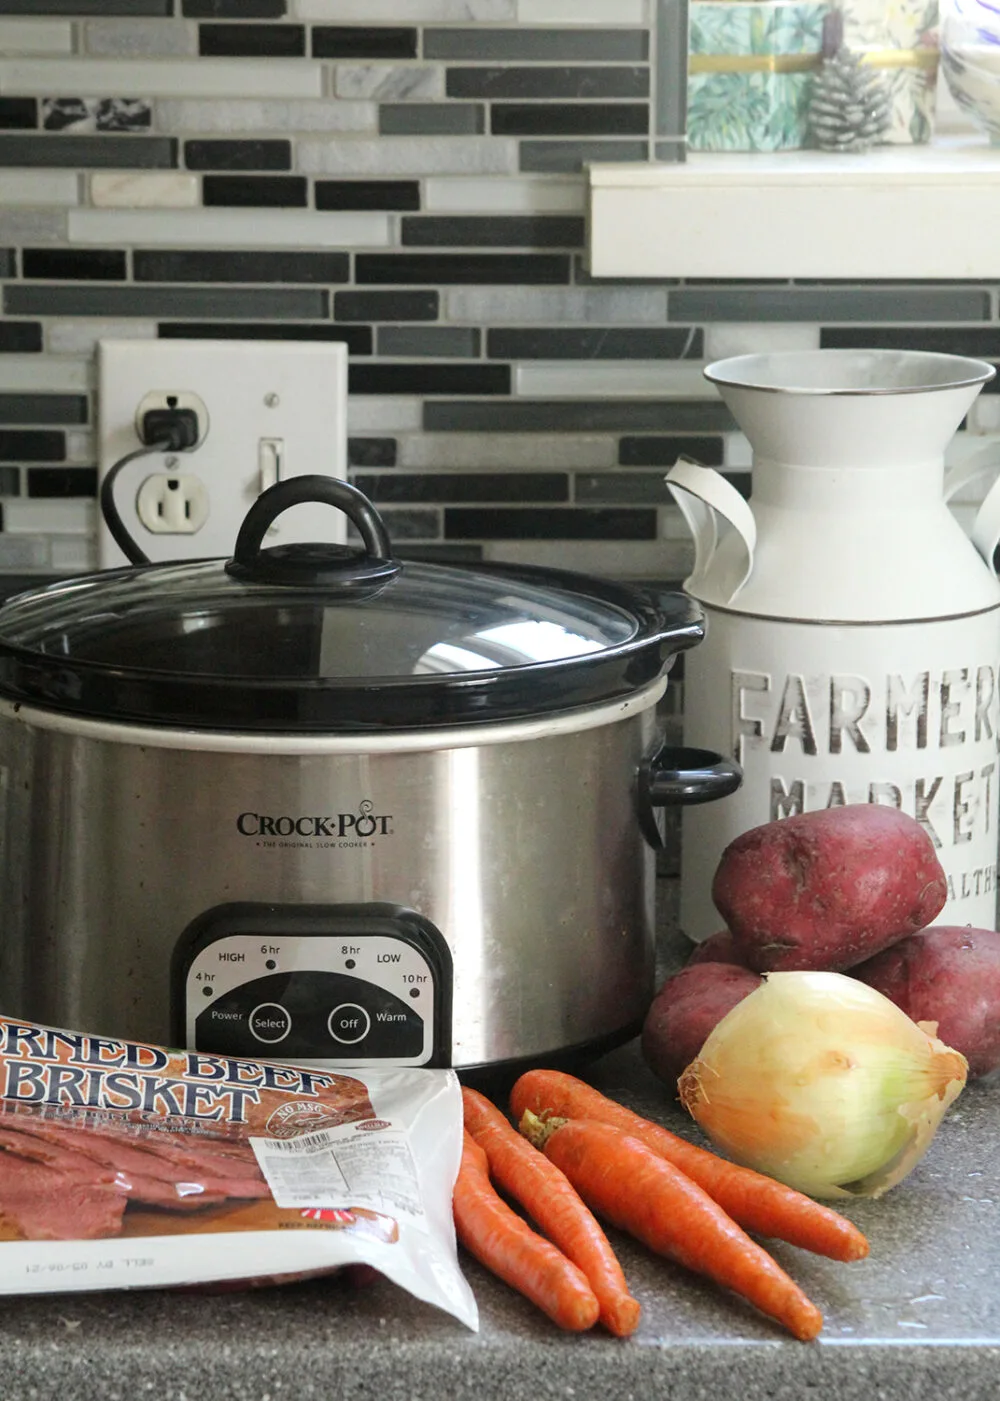 A slow cooker, potatoes, carrots, an onion and a package of corned beef sit on a counter.